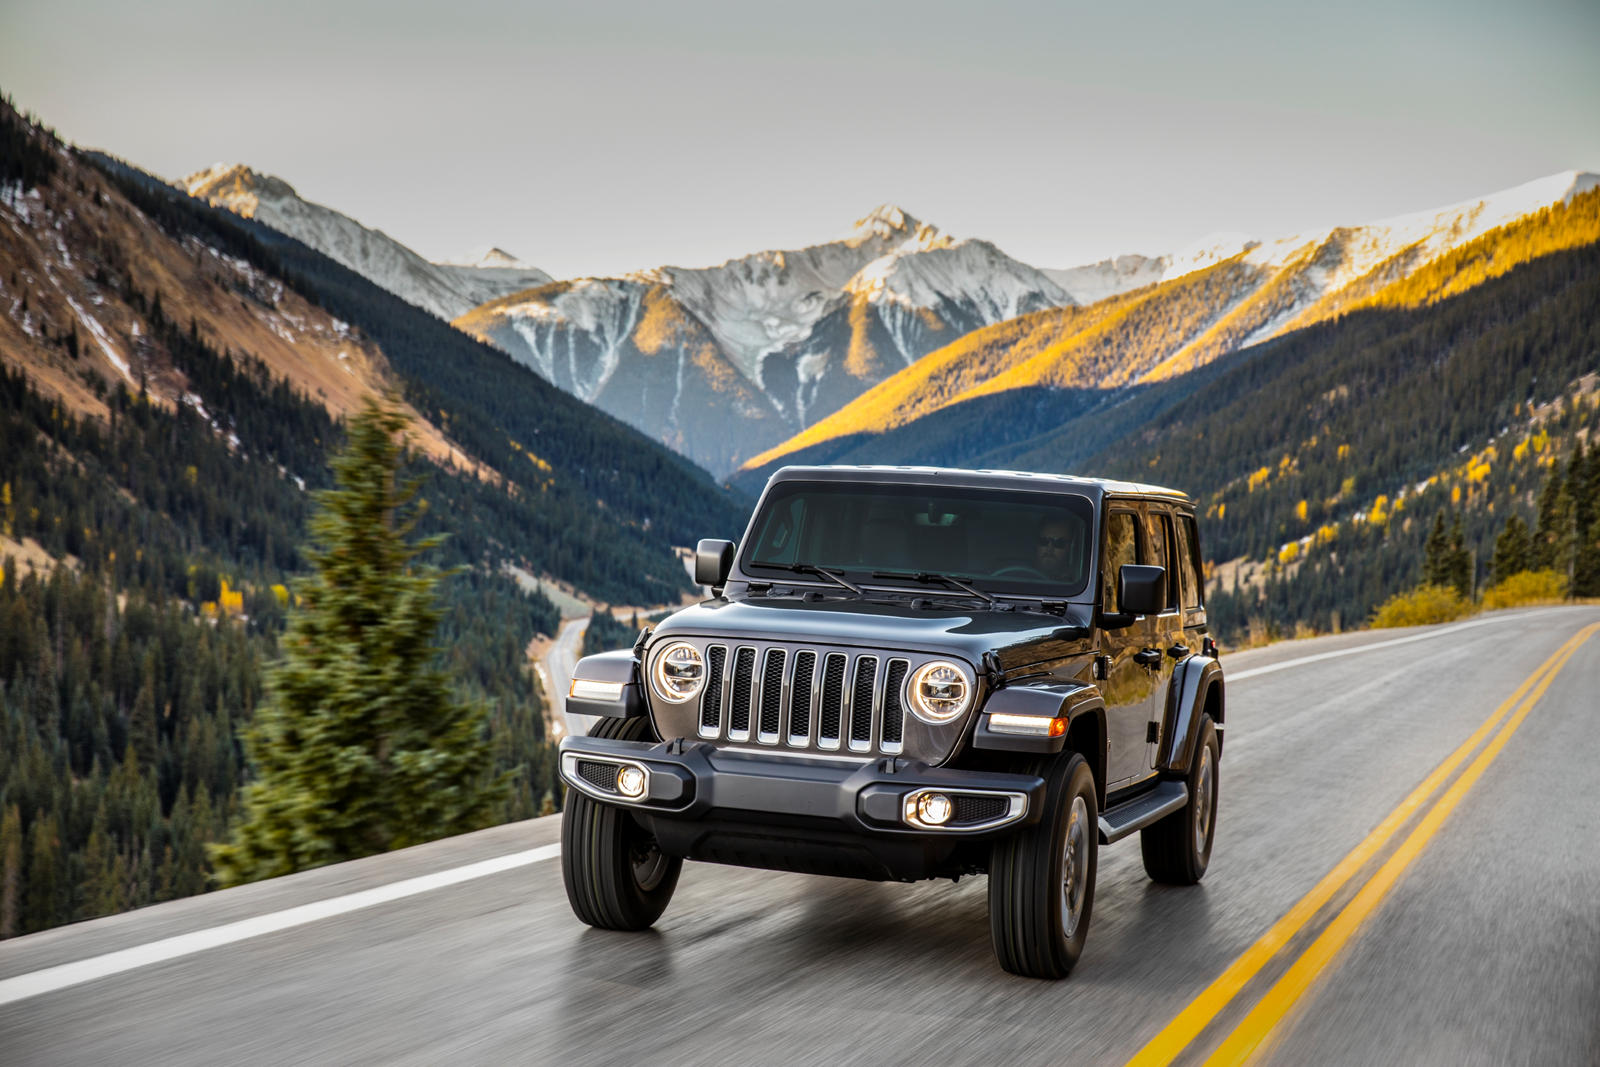 2021 Jeep Wrangler Arrives With Upgraded Tech And New Special Editions